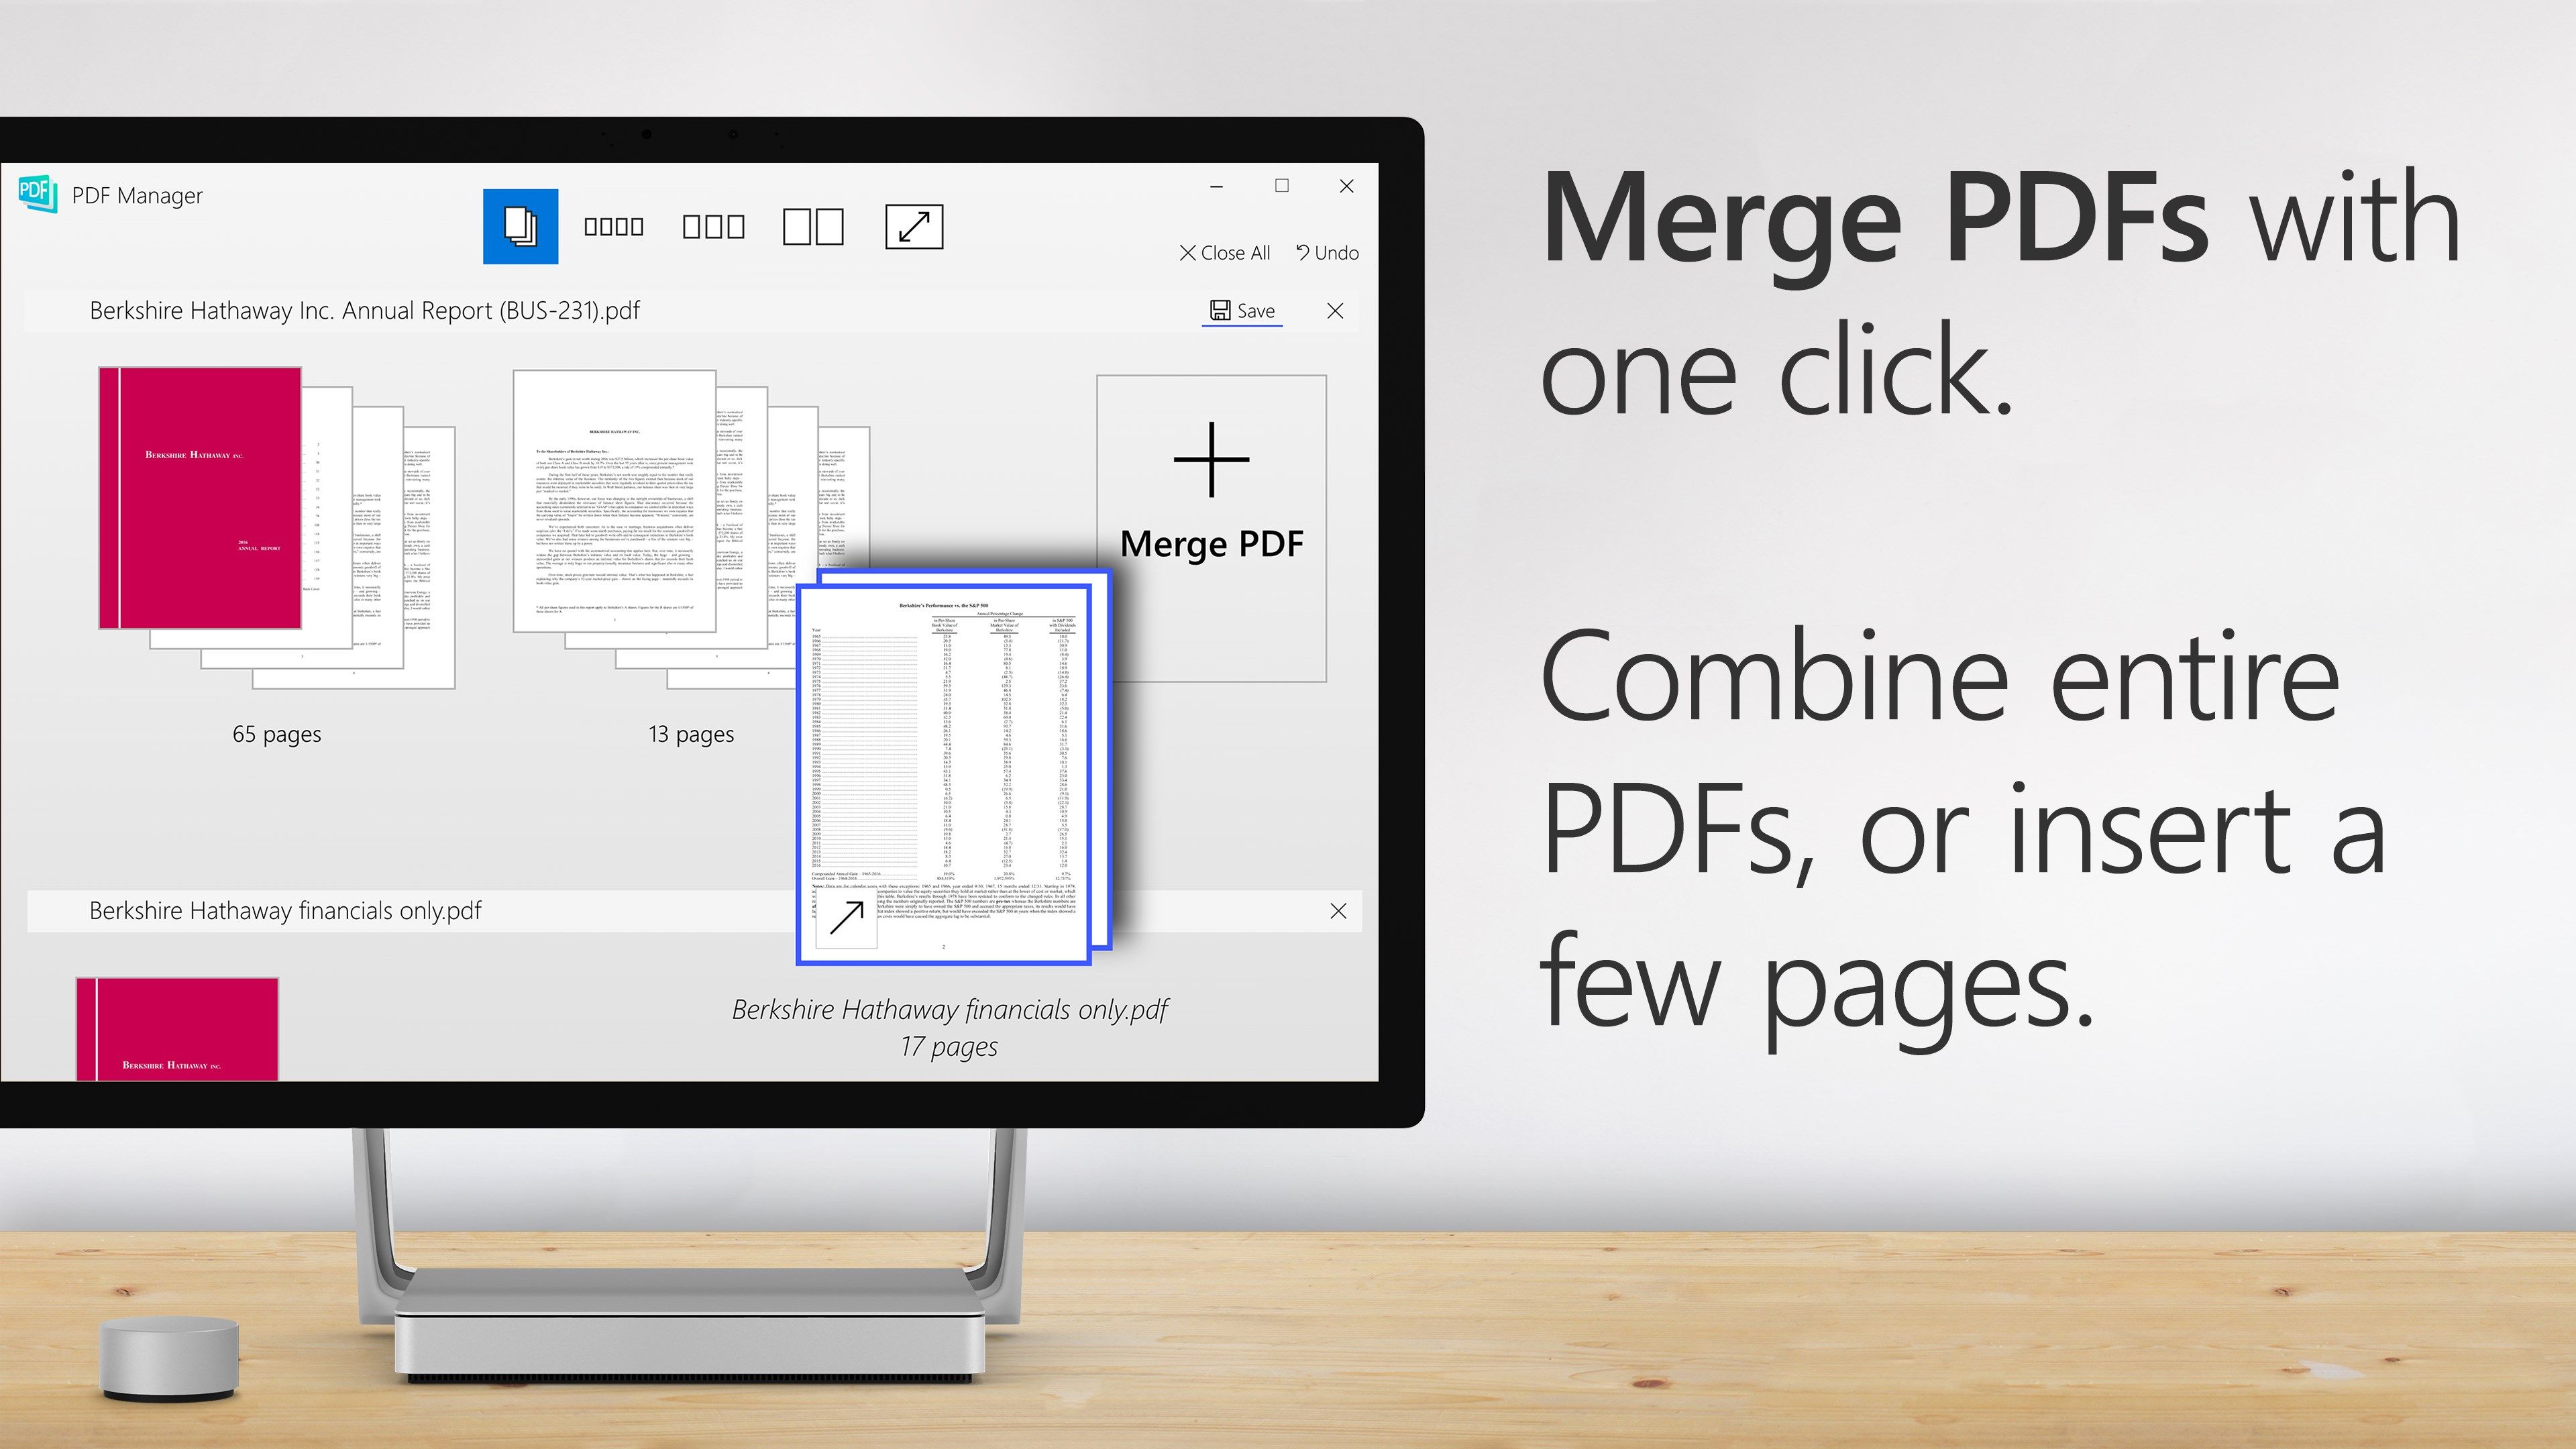 Merge PDFs with one click.